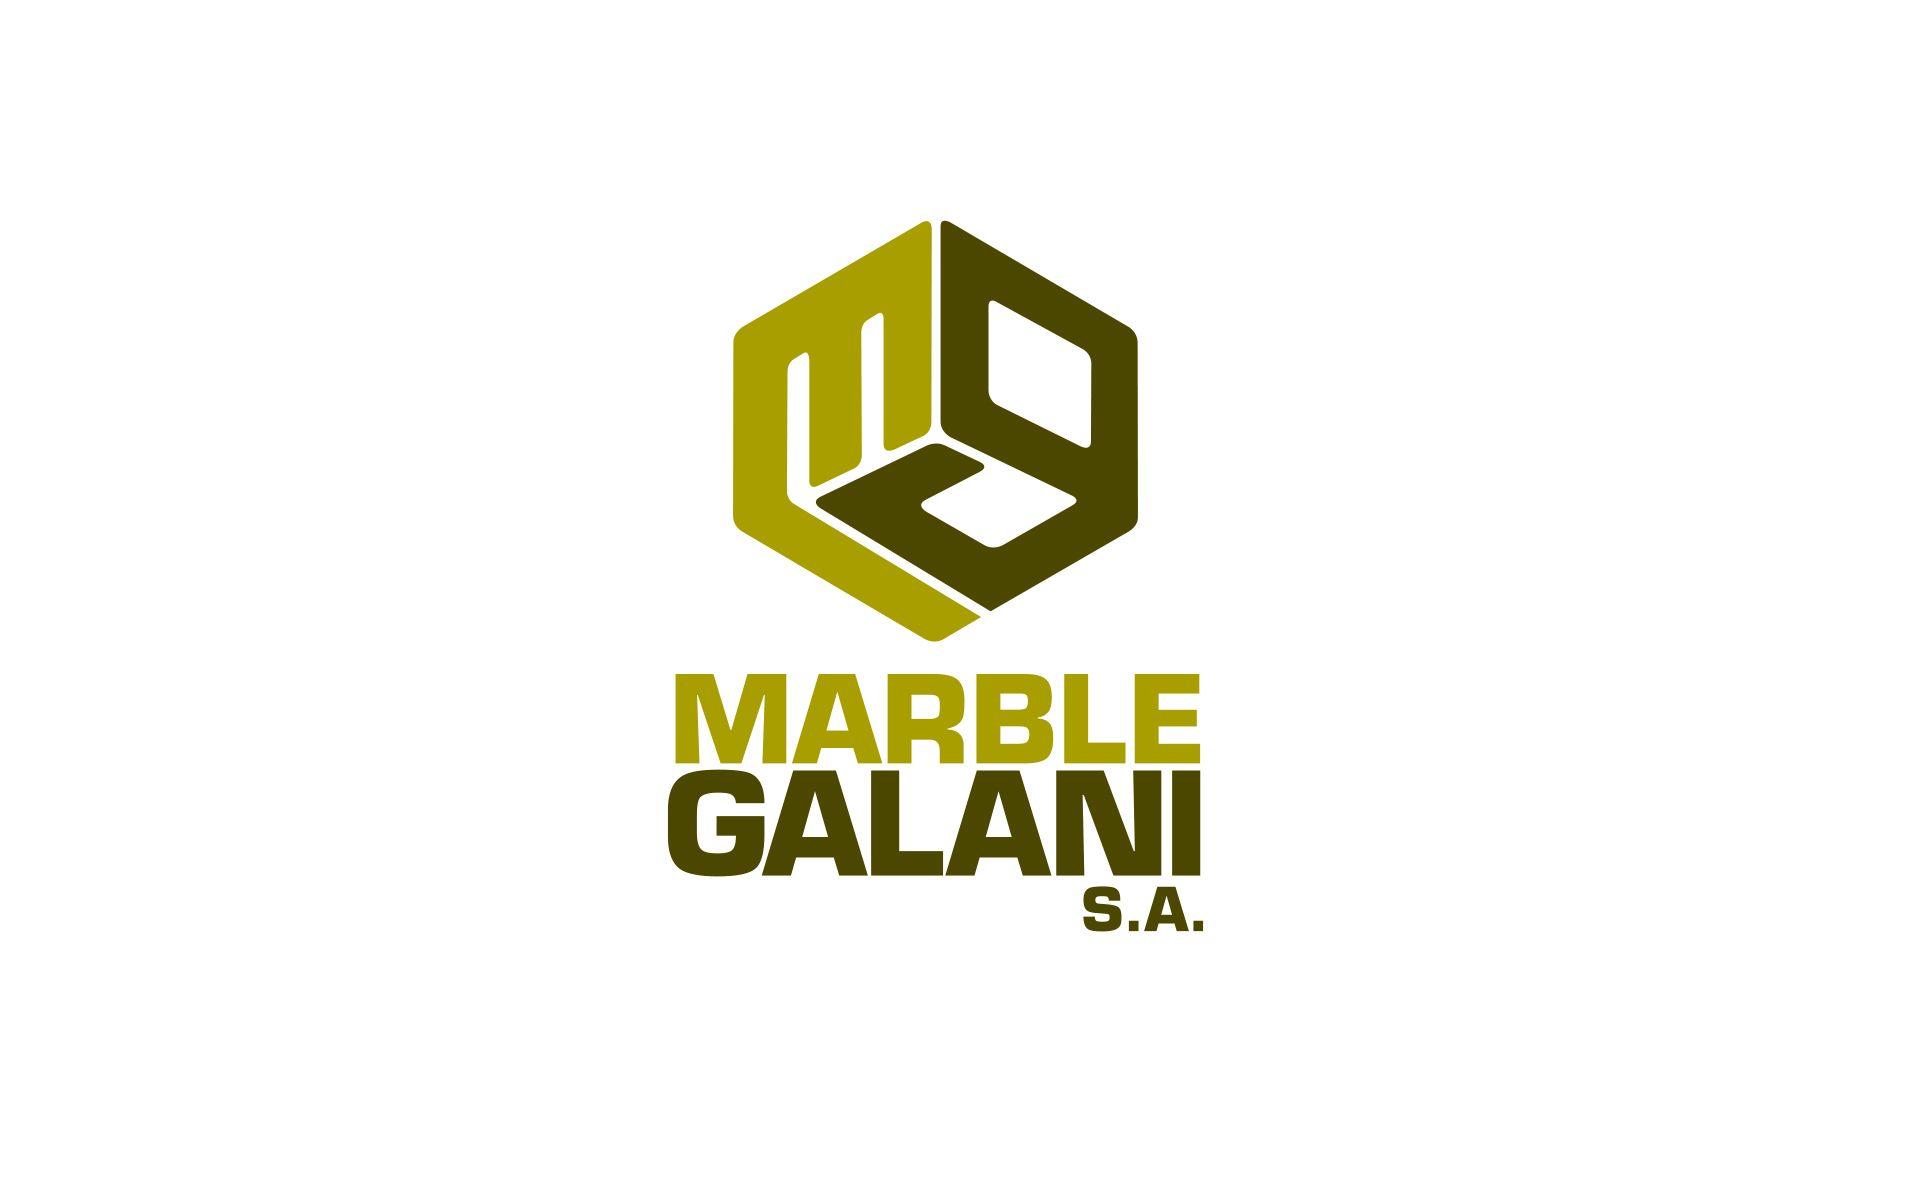 Using Marbles Starting with G Logo - Galanis Marble - Logo Design - N2C - Web & Graphic Design, Motion ...